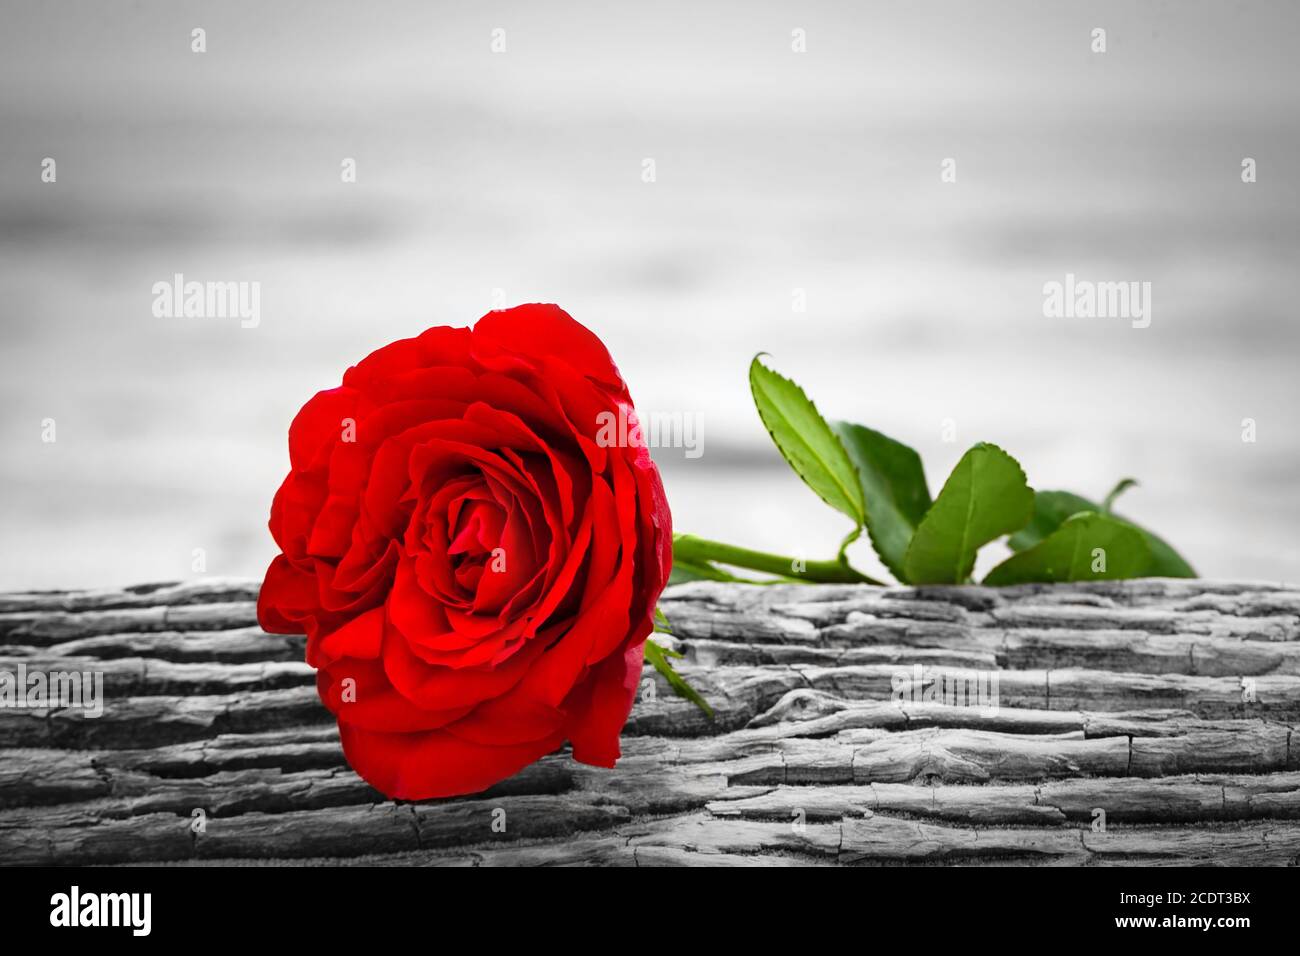 Red rose on the beach. Color against black and white. Love, romance, melancholy concepts. Stock Photo